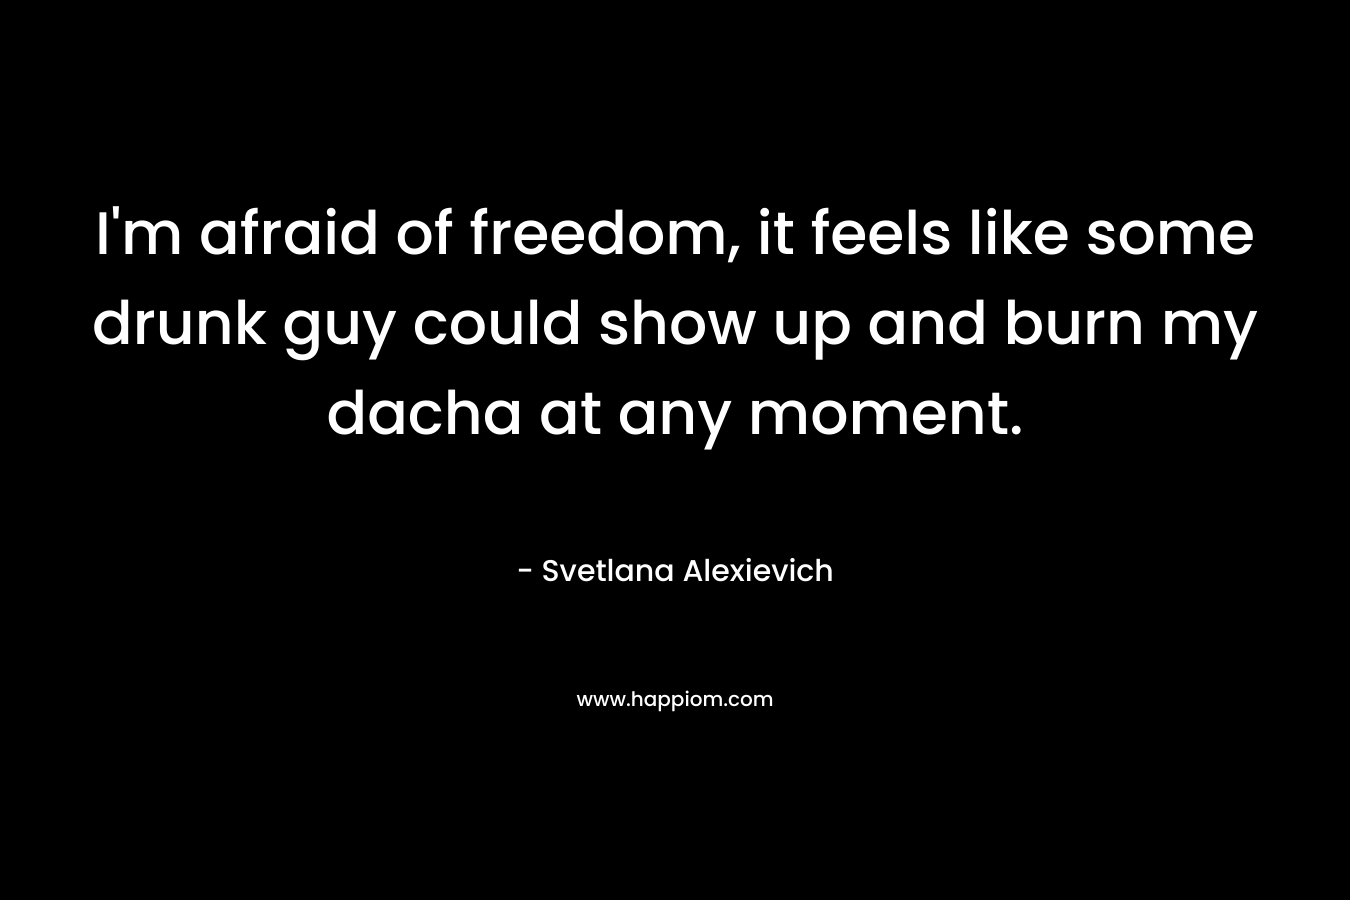 I'm afraid of freedom, it feels like some drunk guy could show up and burn my dacha at any moment.